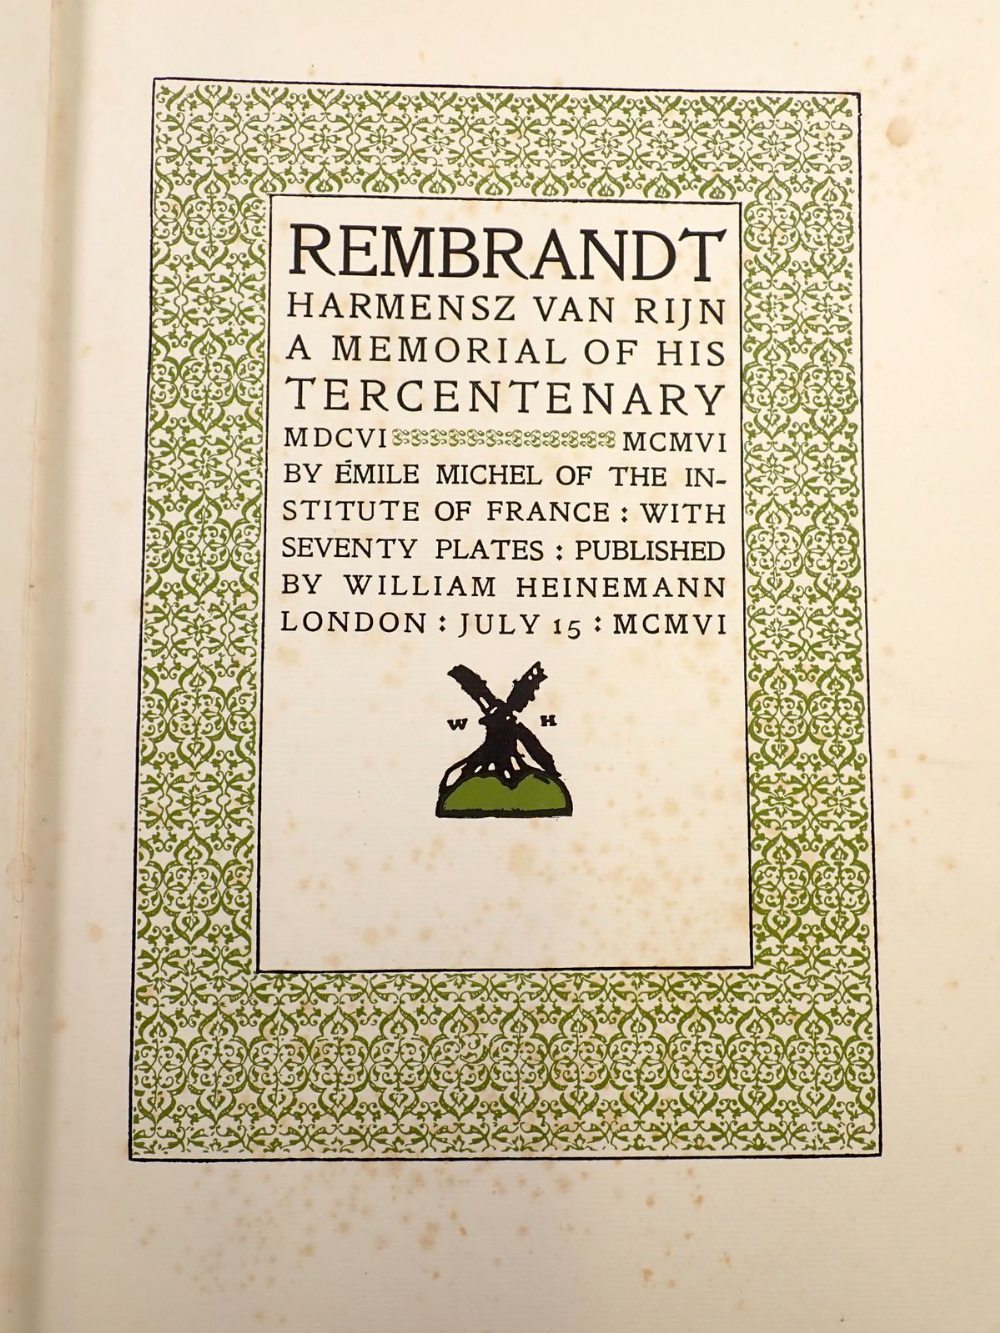 Rembrandt A Memorial of his Tercentenary 1606-1906 by Emile Michel with seventy plates plus Bryans - Image 2 of 3